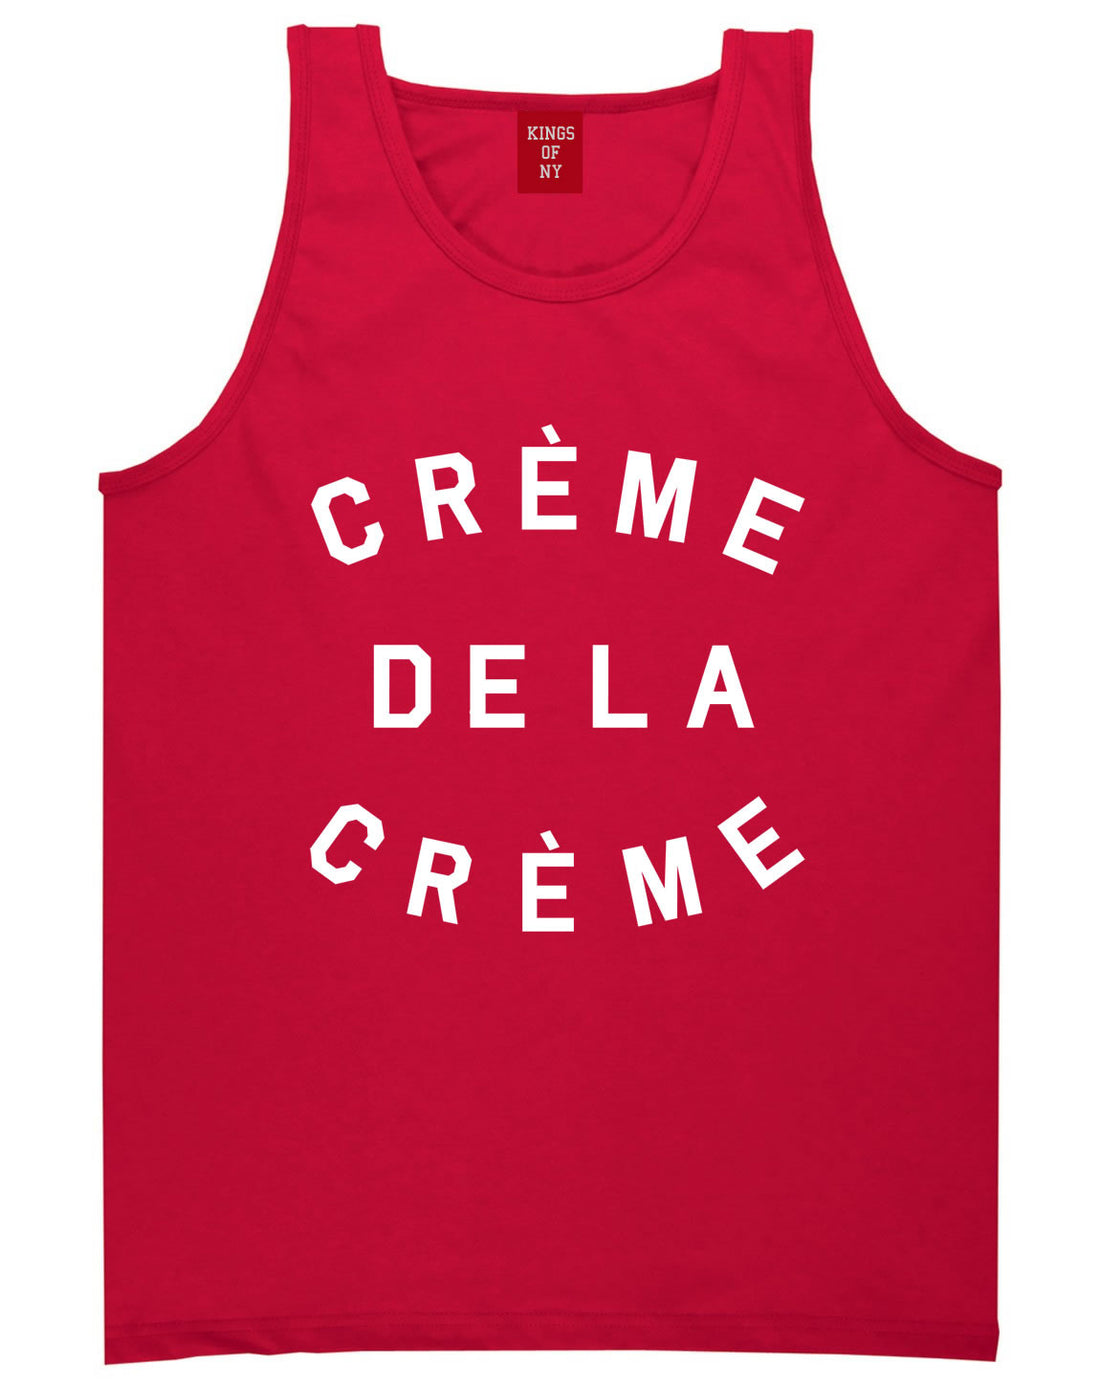 Creme De La Creme Celebrity Fashion Crop Tank Top In Red by Kings Of NY